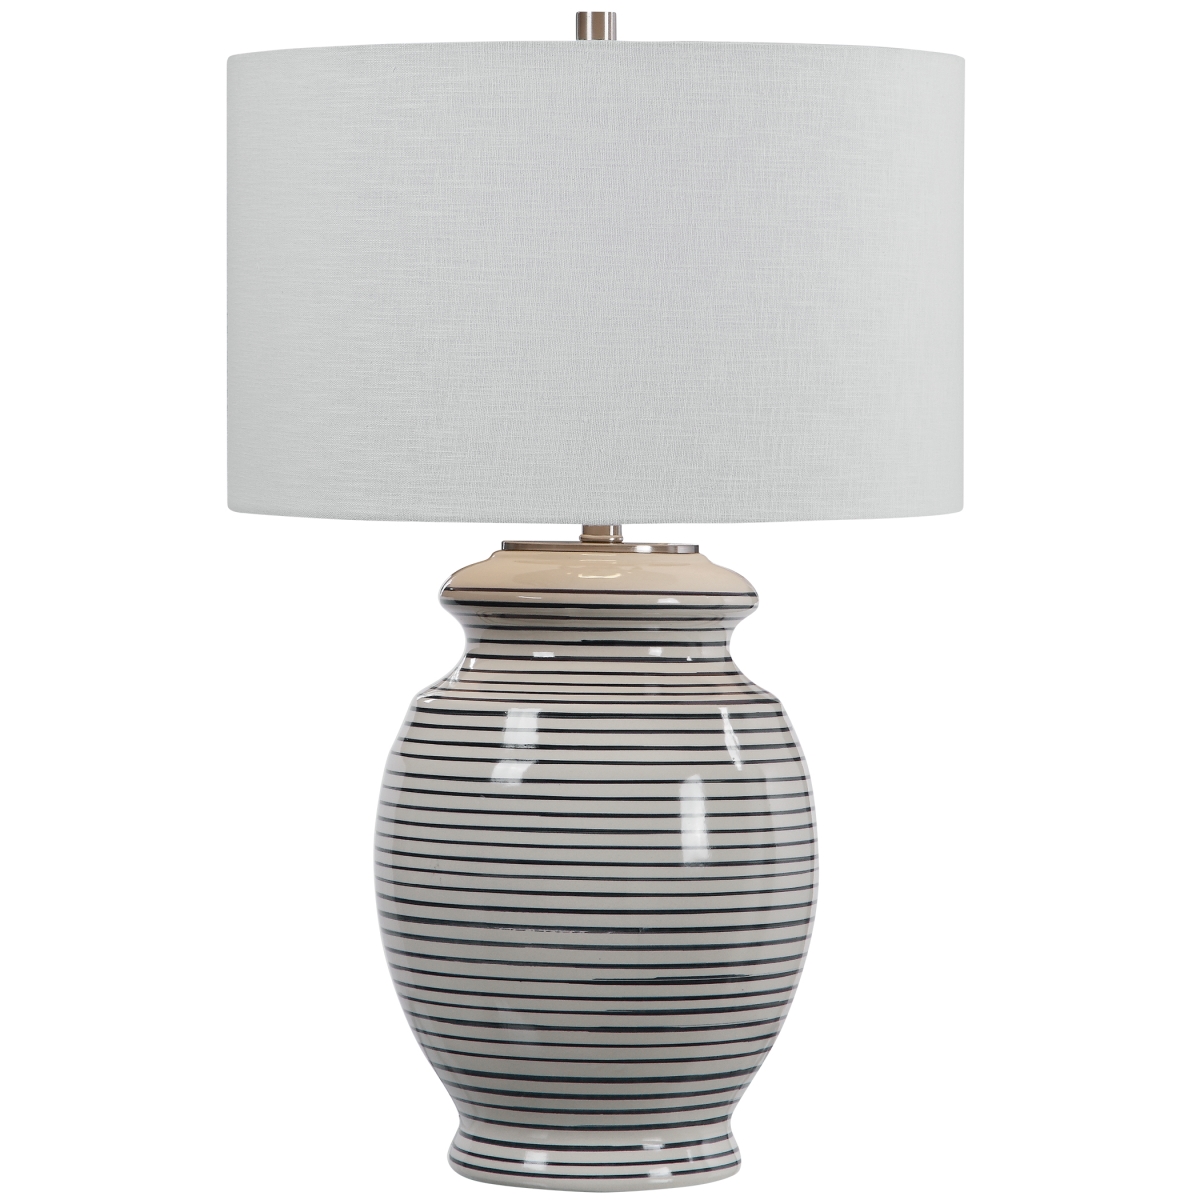 Picture of 212 Main 26383-1 Marisa Off White Table Lamp